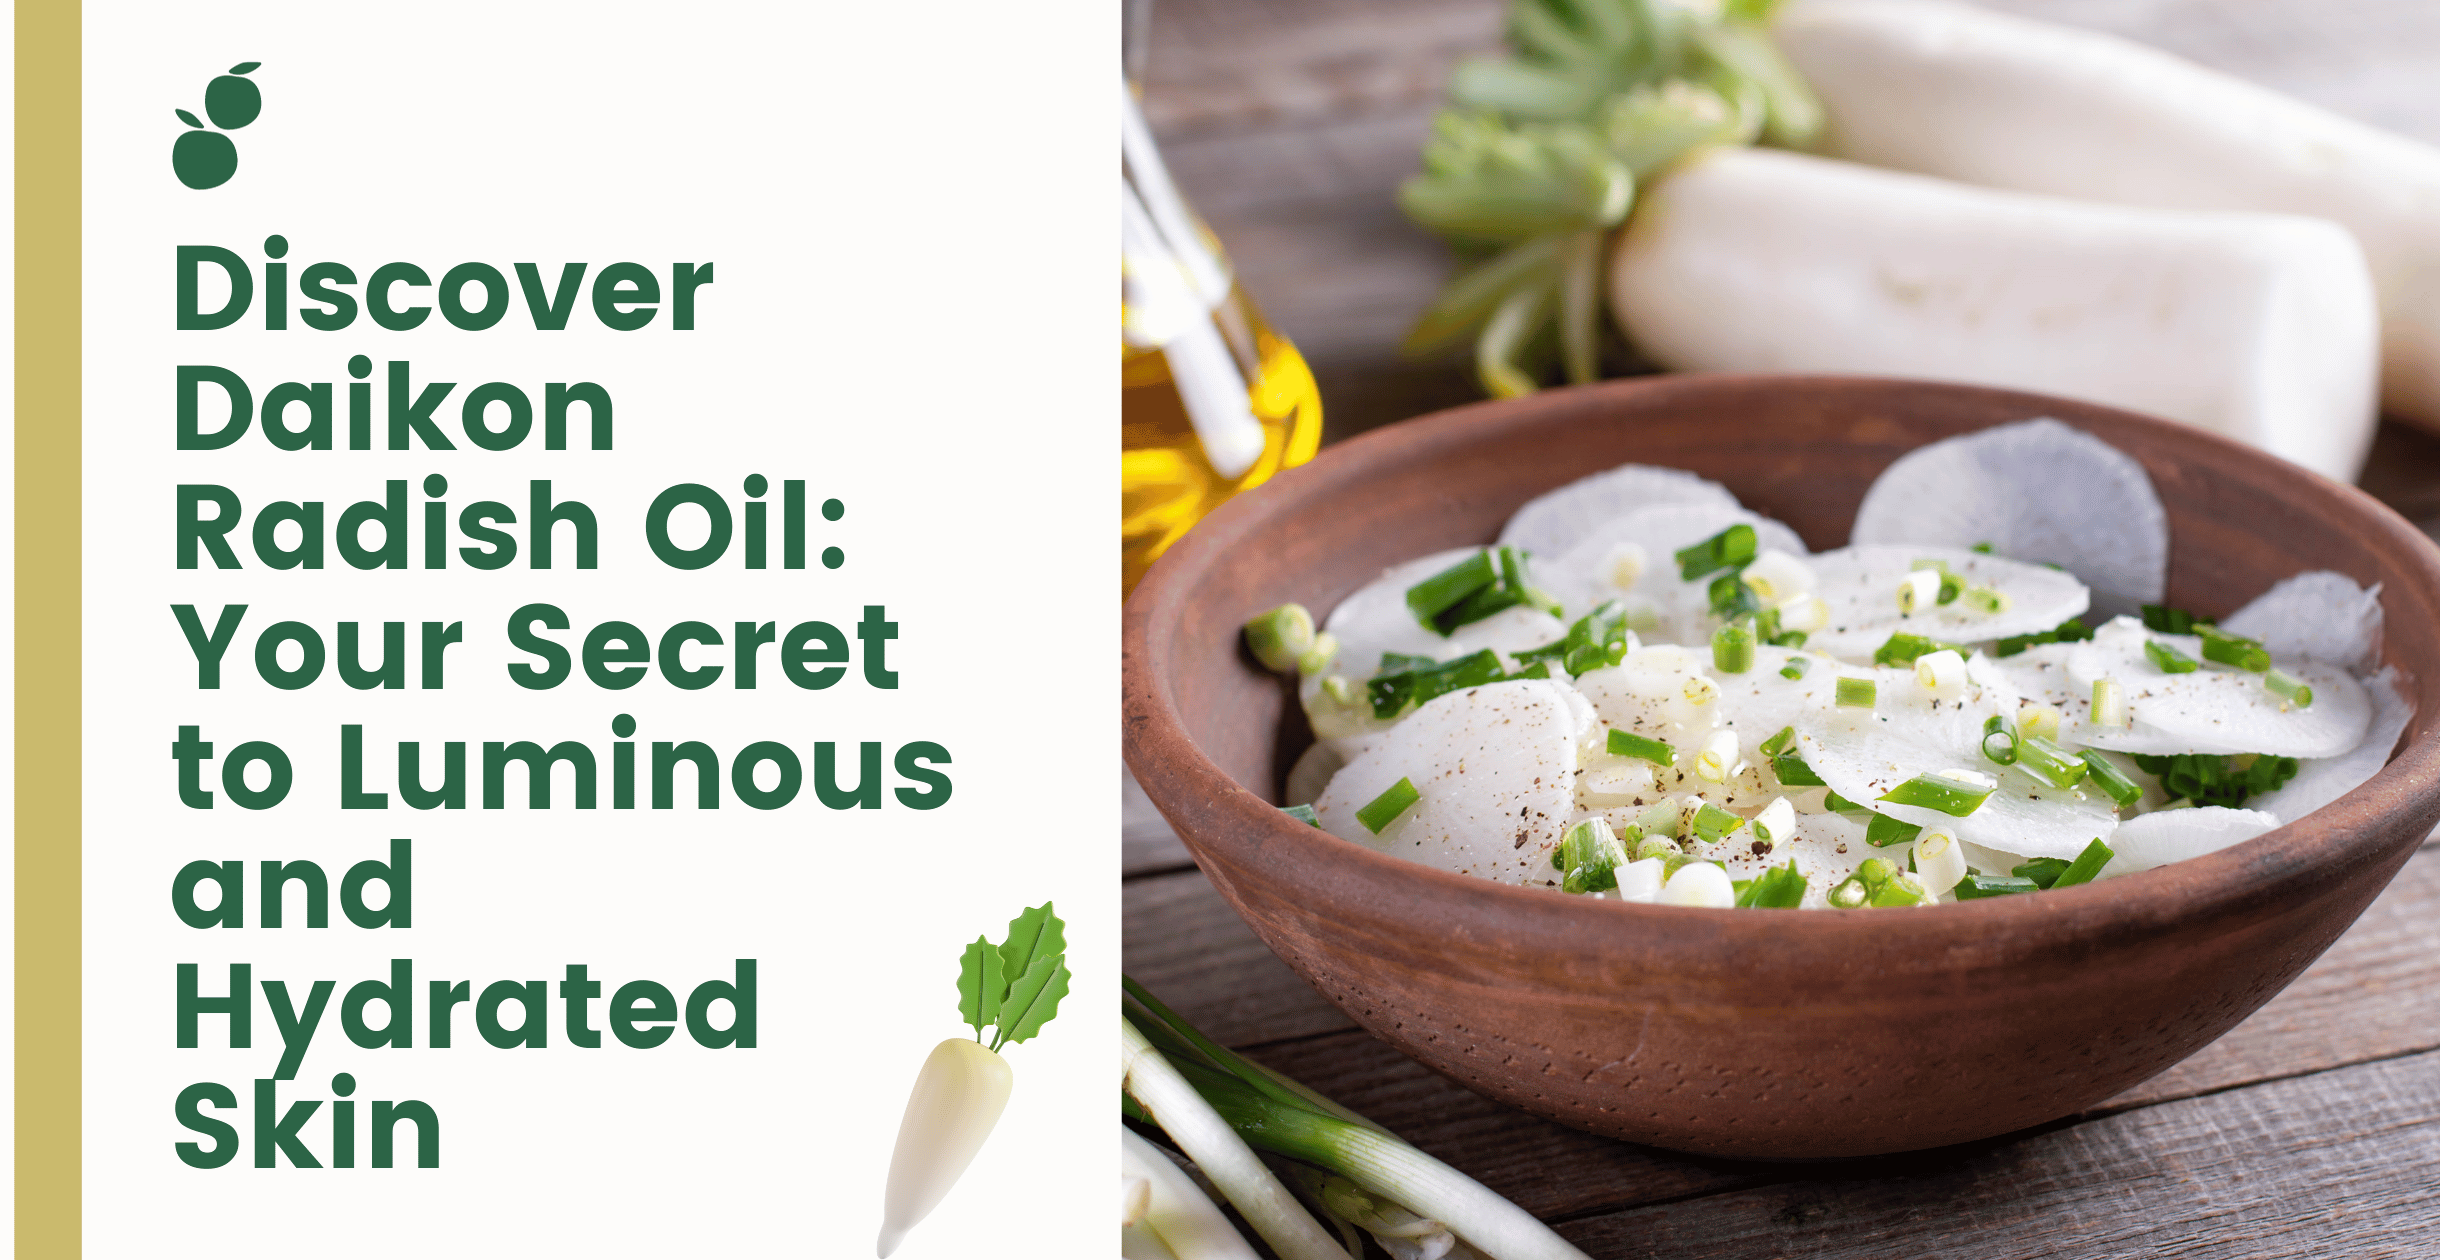 Discover Daikon Radish Oil: Your Secret to Luminous and Hydrated Skin